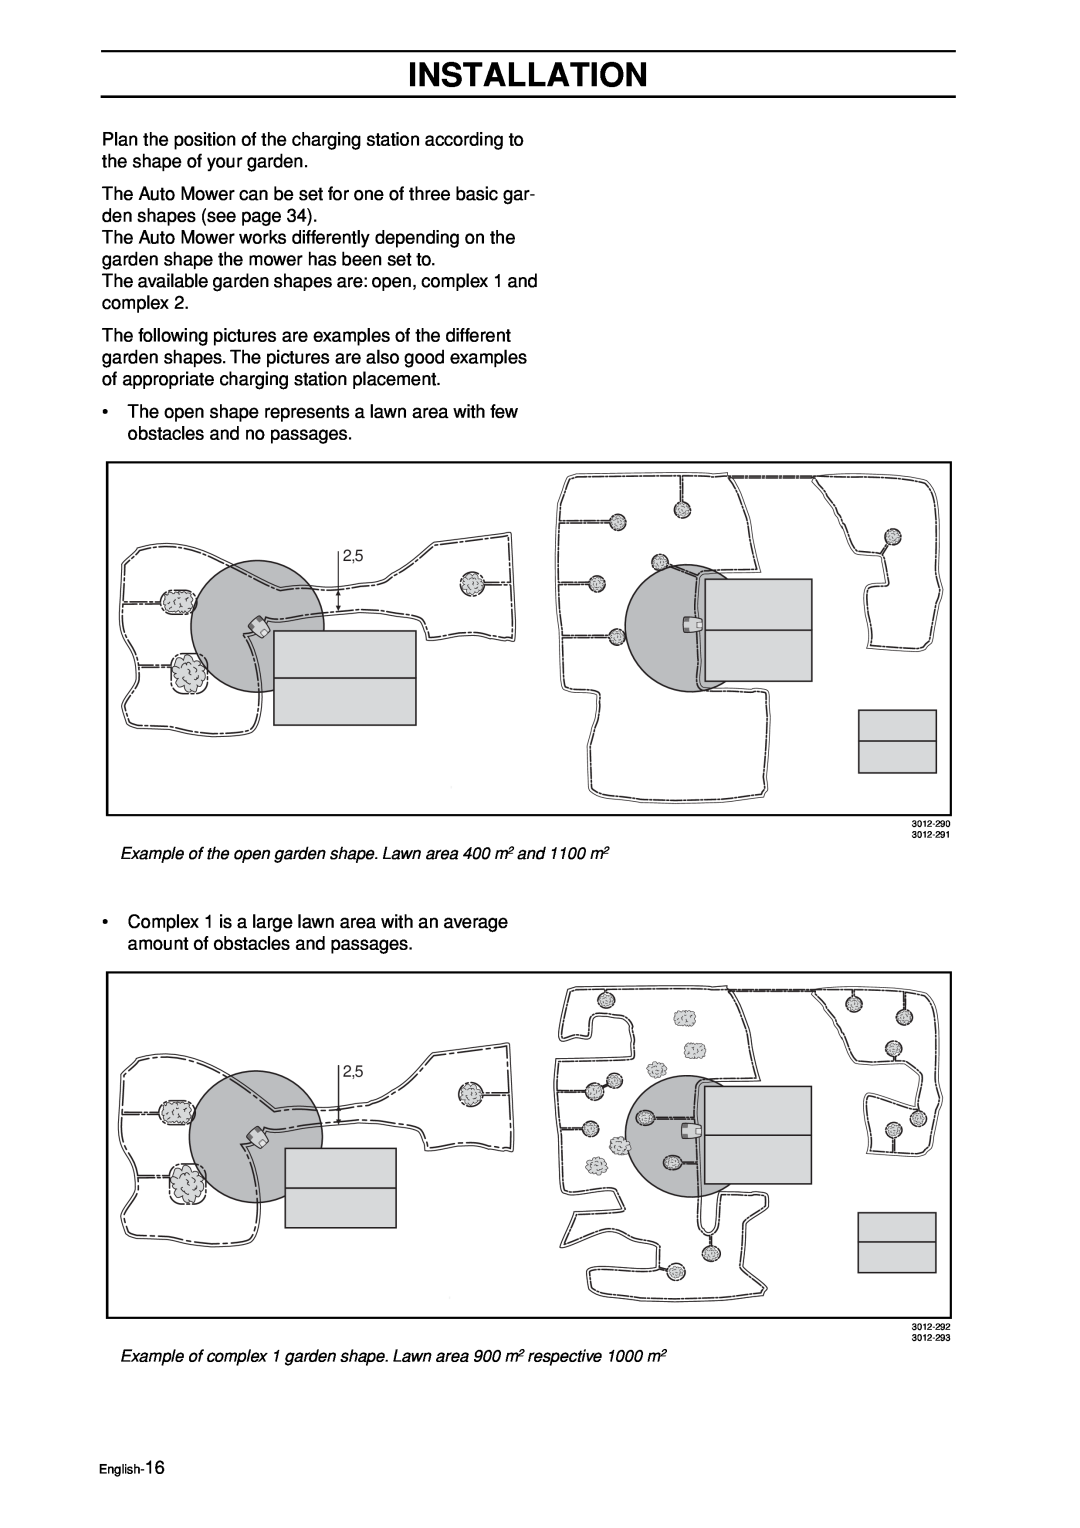 Husqvarna Auto Mower manual Installation, The available garden shapes are open, complex 1 and complex 